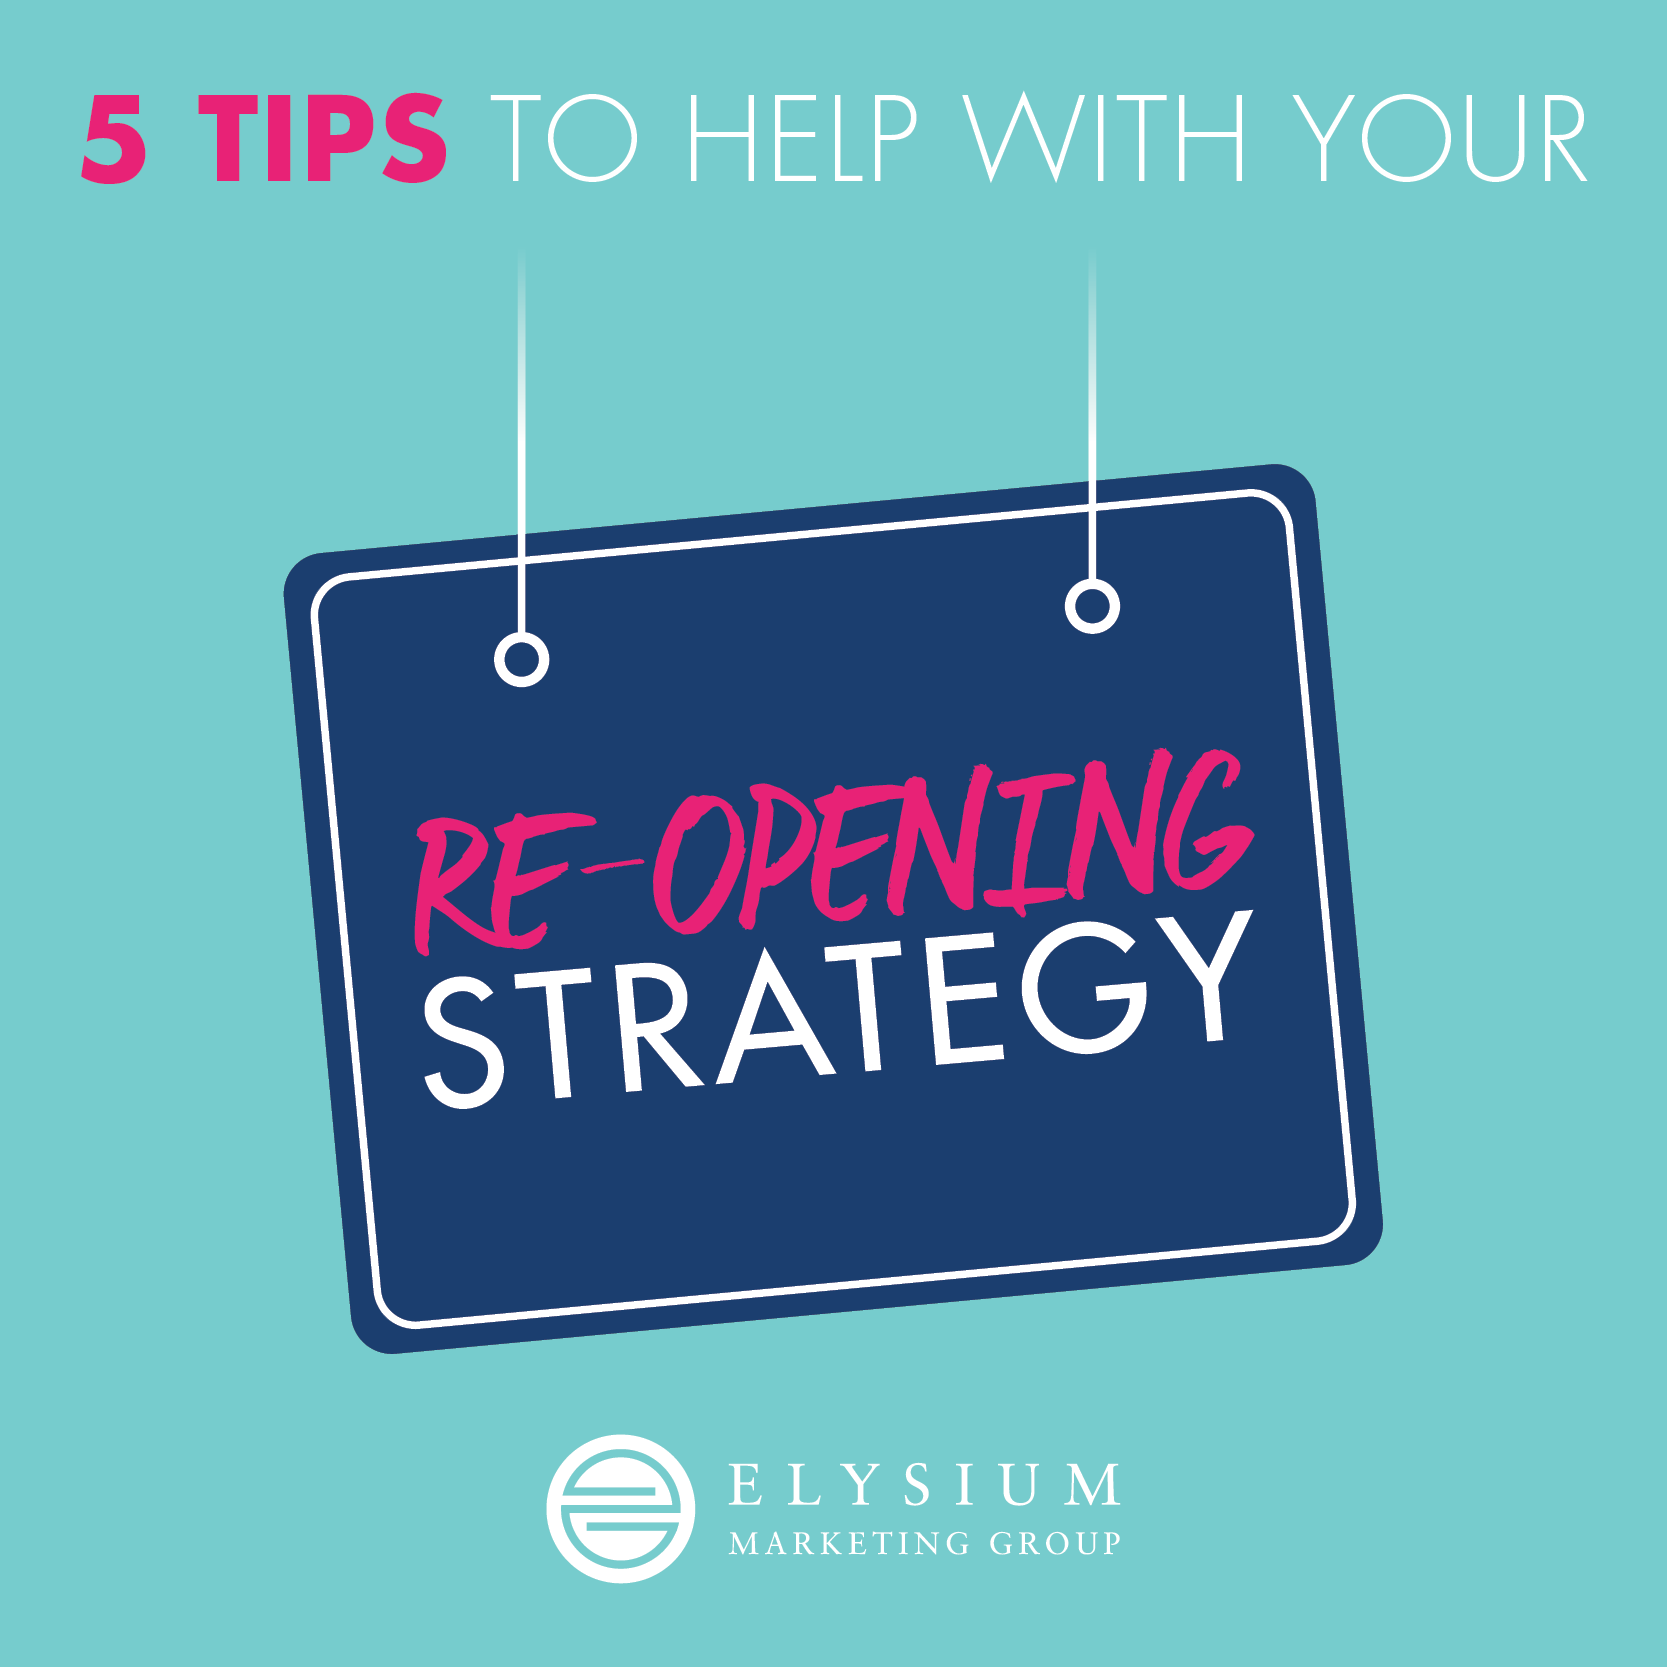 Re-opening Strategy by Elysium Marketing Group